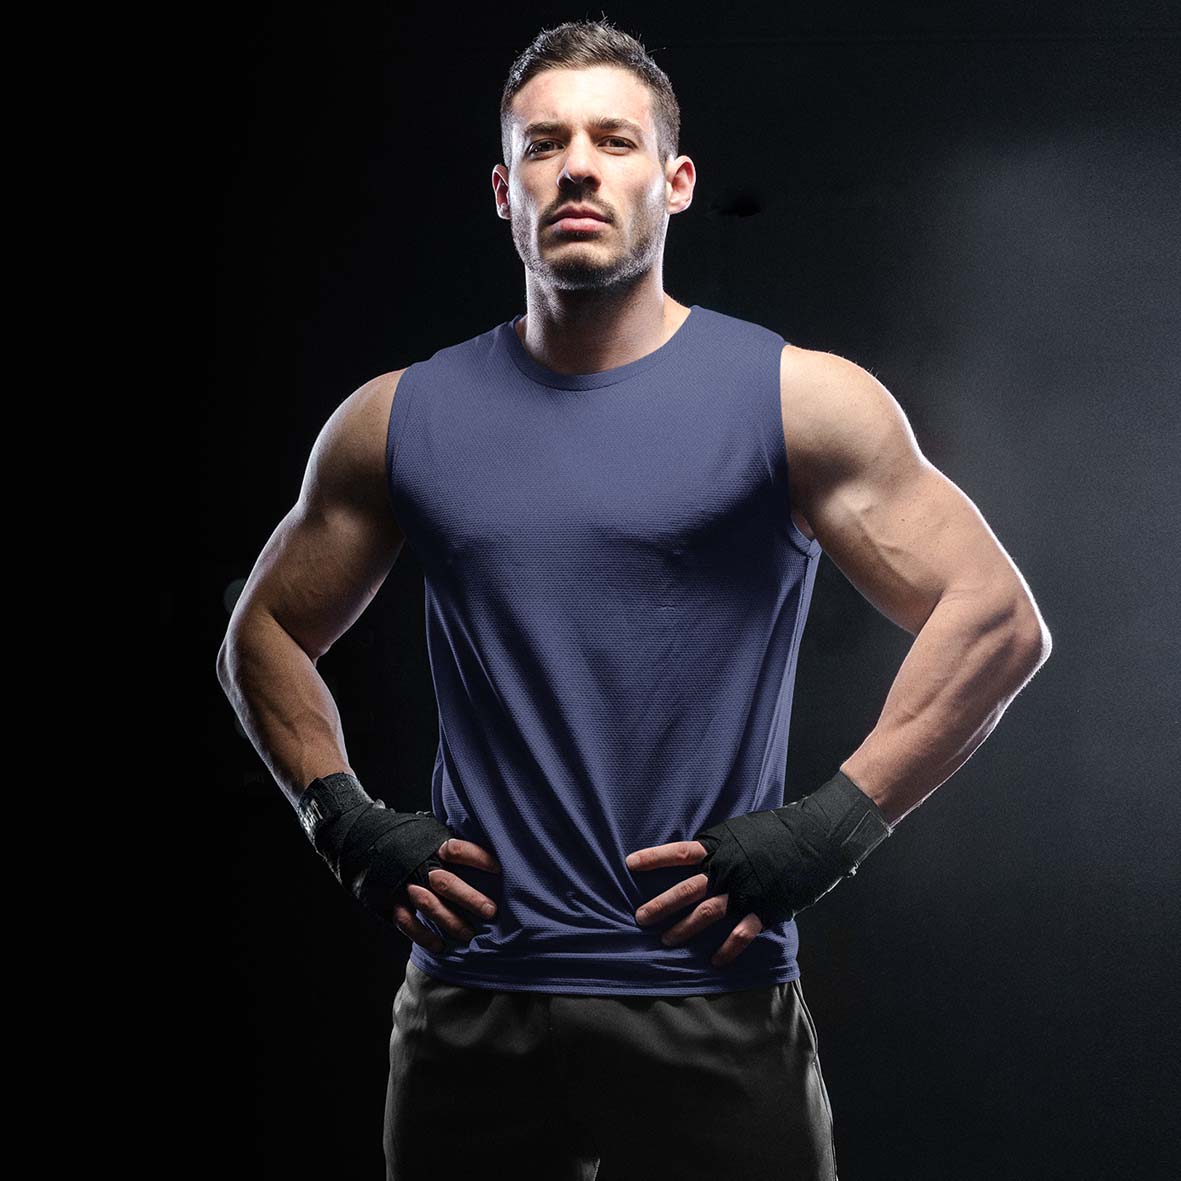 navy blue sleeveless tshirts gym vests by the banyan tee buy cheap gym tshirts in india vests for men